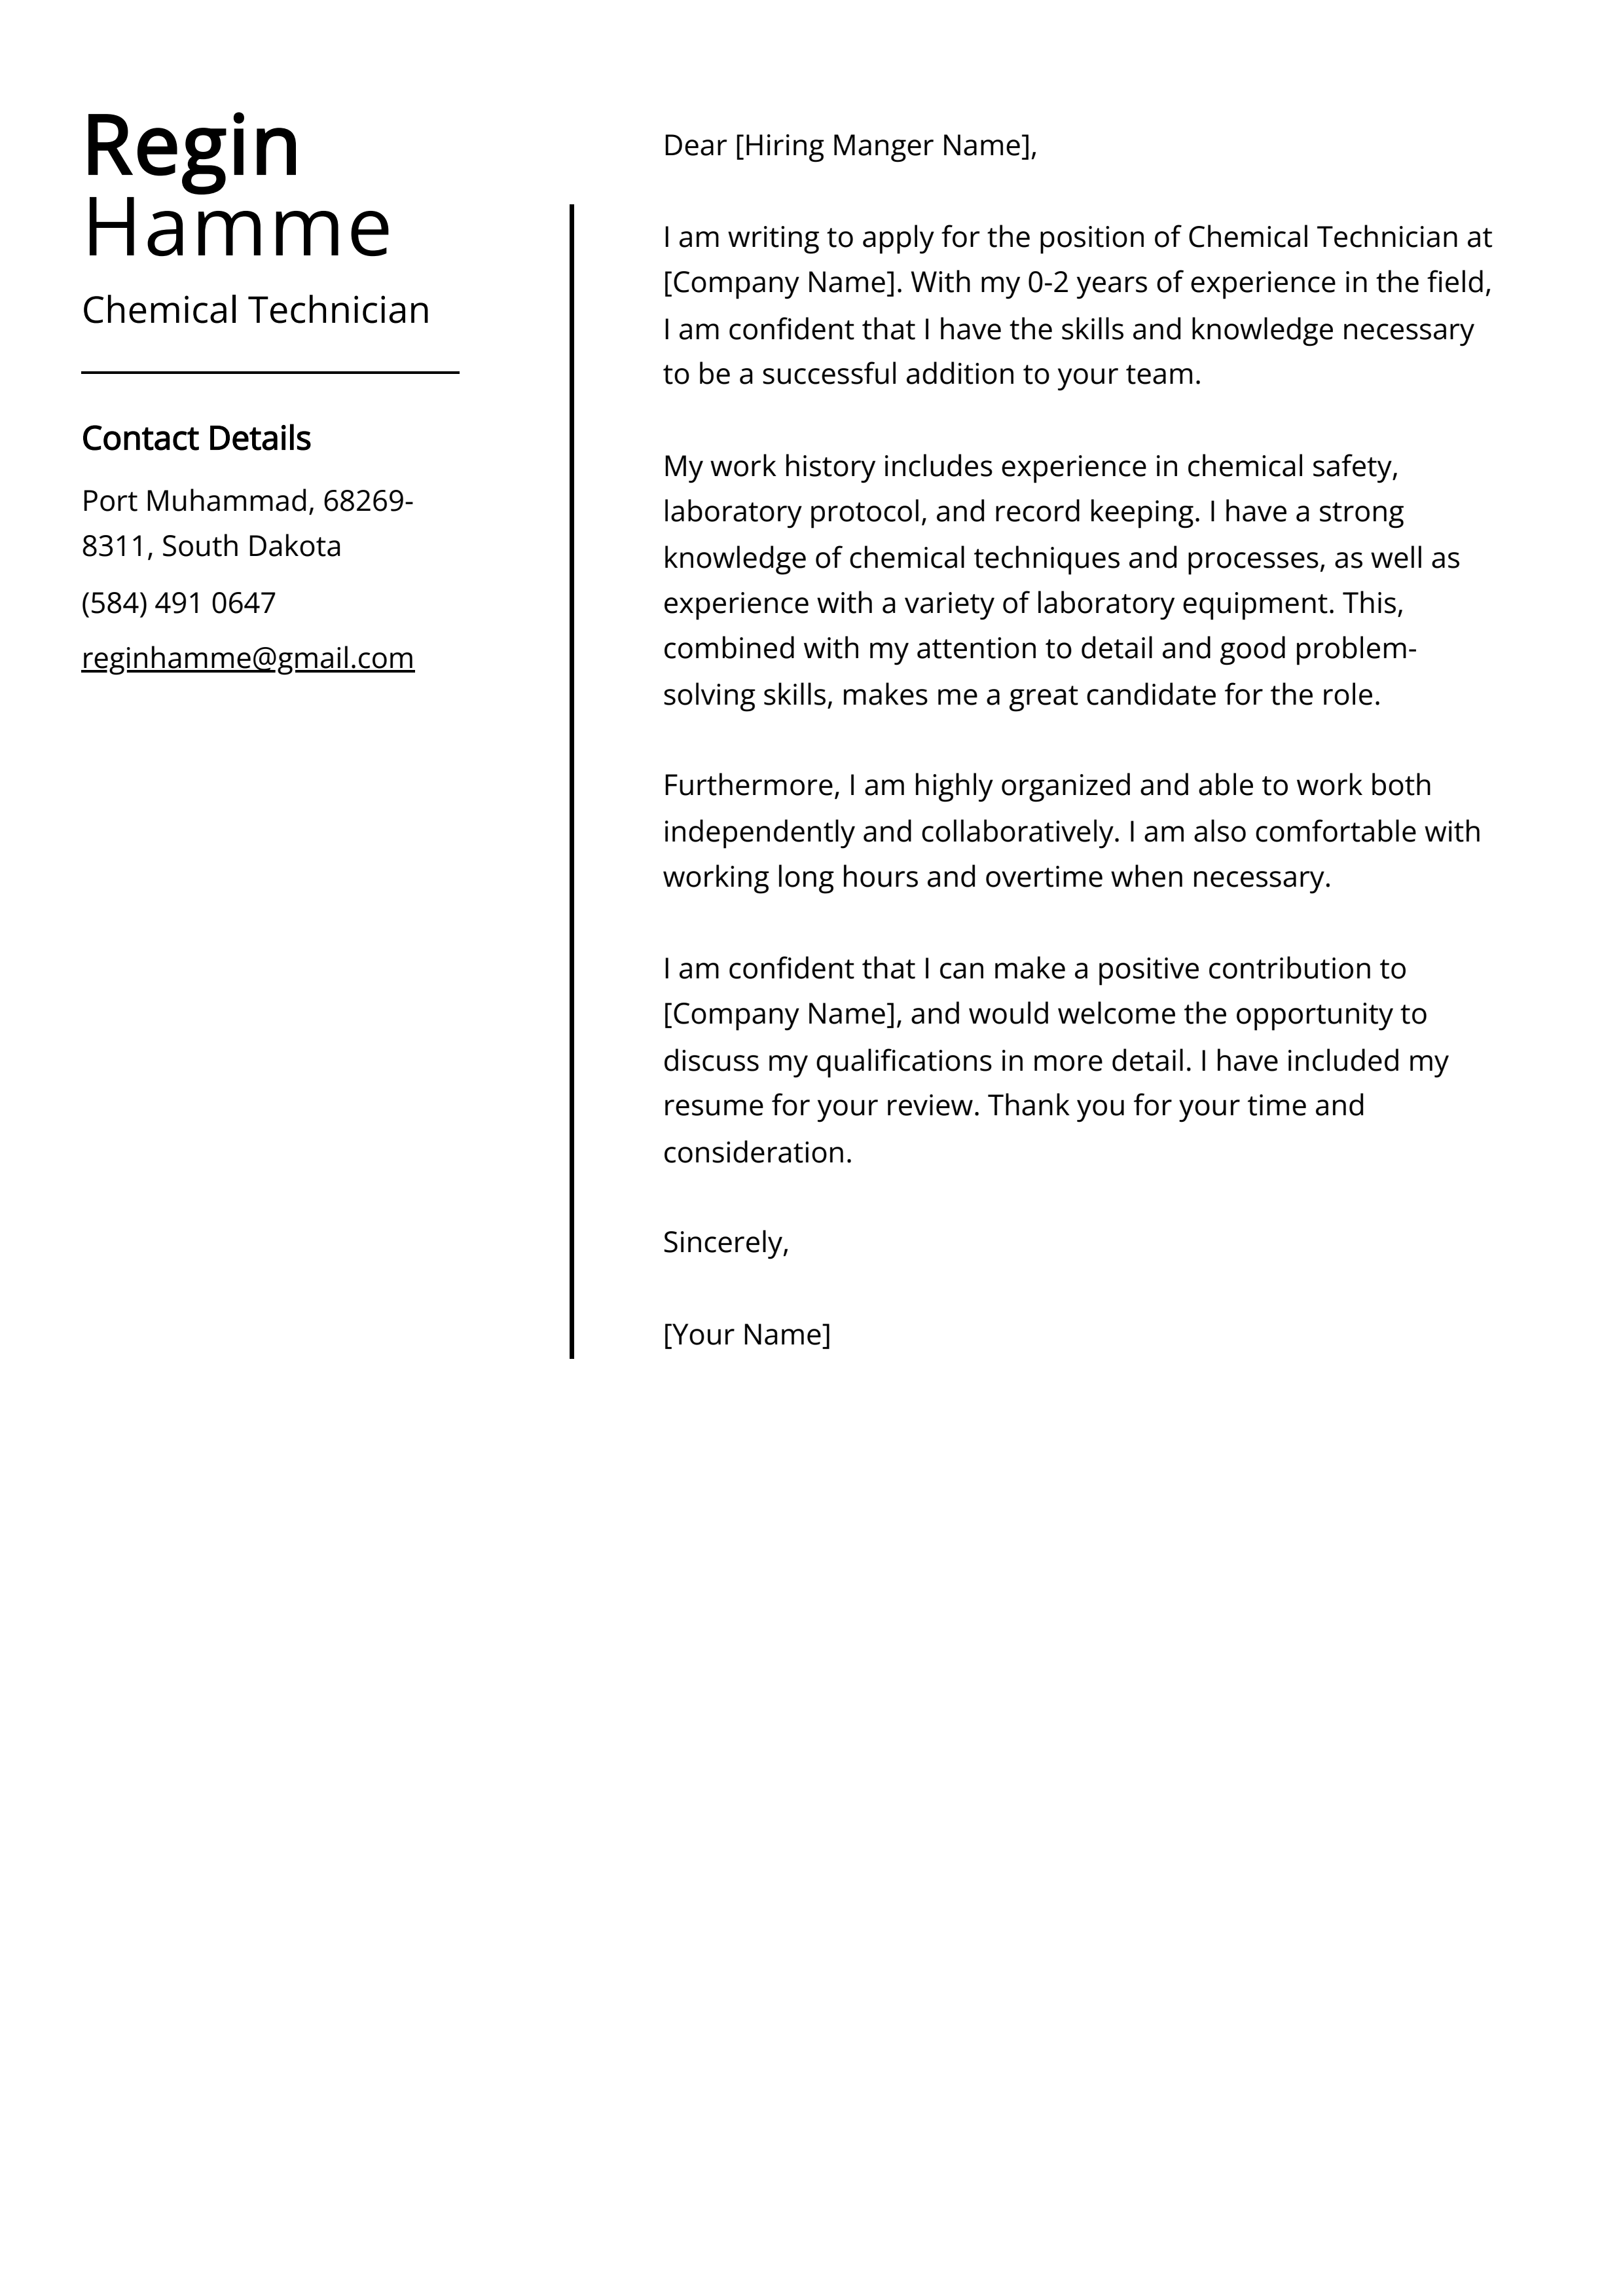 Chemical Technician Cover Letter Example